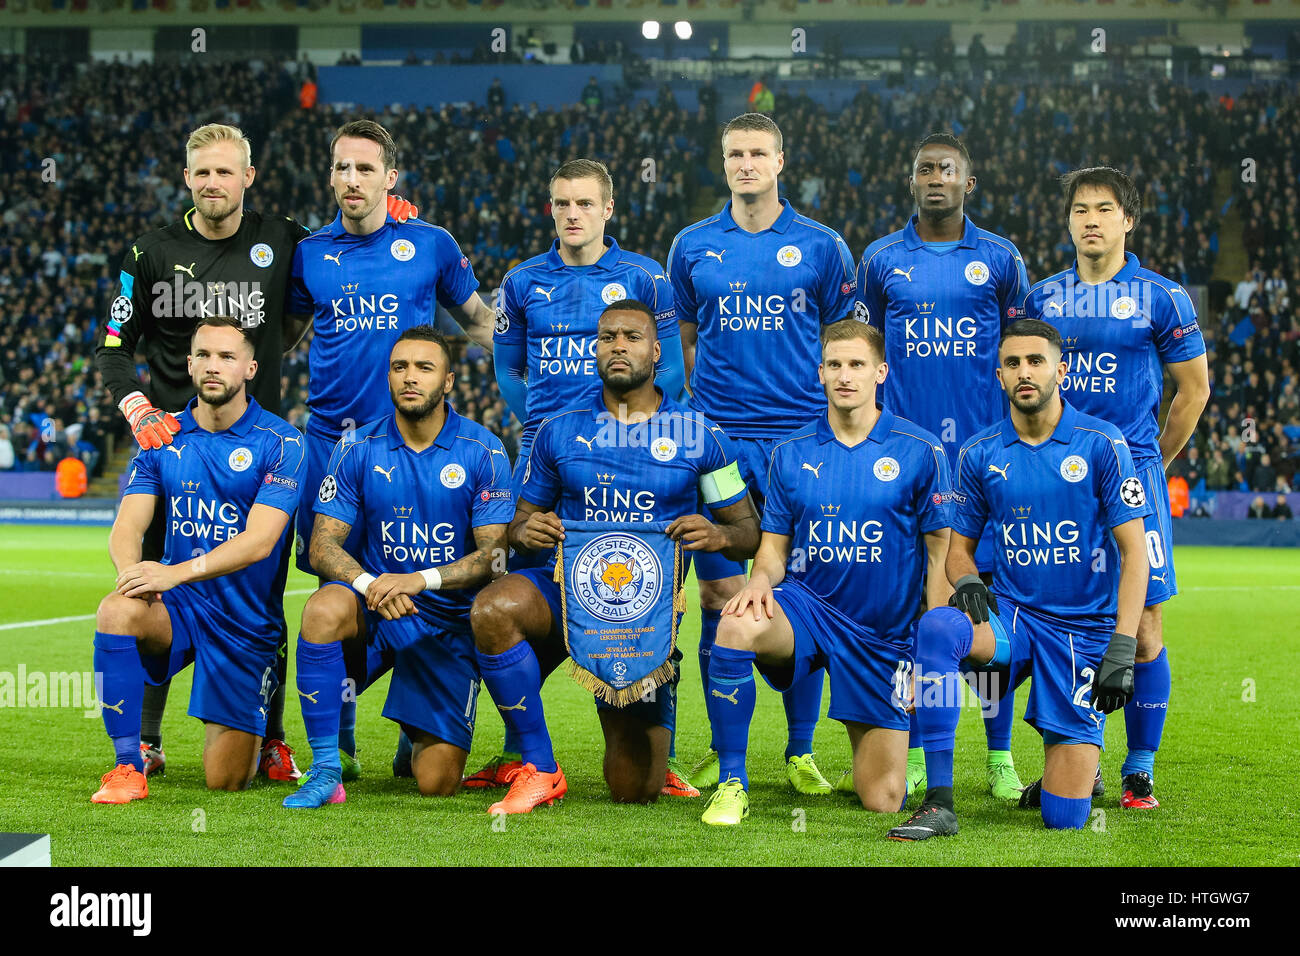 Leicester, UK. 14th Mar, 2017. Leicester City team group line-up Football/Soccer : (Top L-R) Kasper Schmeichel, Christian Fuchs, Jamie Vardy, Robert Huth, Wilfred Ndidi, Shinji Okazaki, (Bottom L-R) Daniel Drinkwater, Danny Simpson, Wes Morgan, Marc Albrighton and Riyad Mahrez of Leicester City during the UEFA Champions League Round of 16 match between Leicester City and Sevilla at King Power Stadium in Leicester, England . Credit: AFLO/Alamy Live News Stock Photo